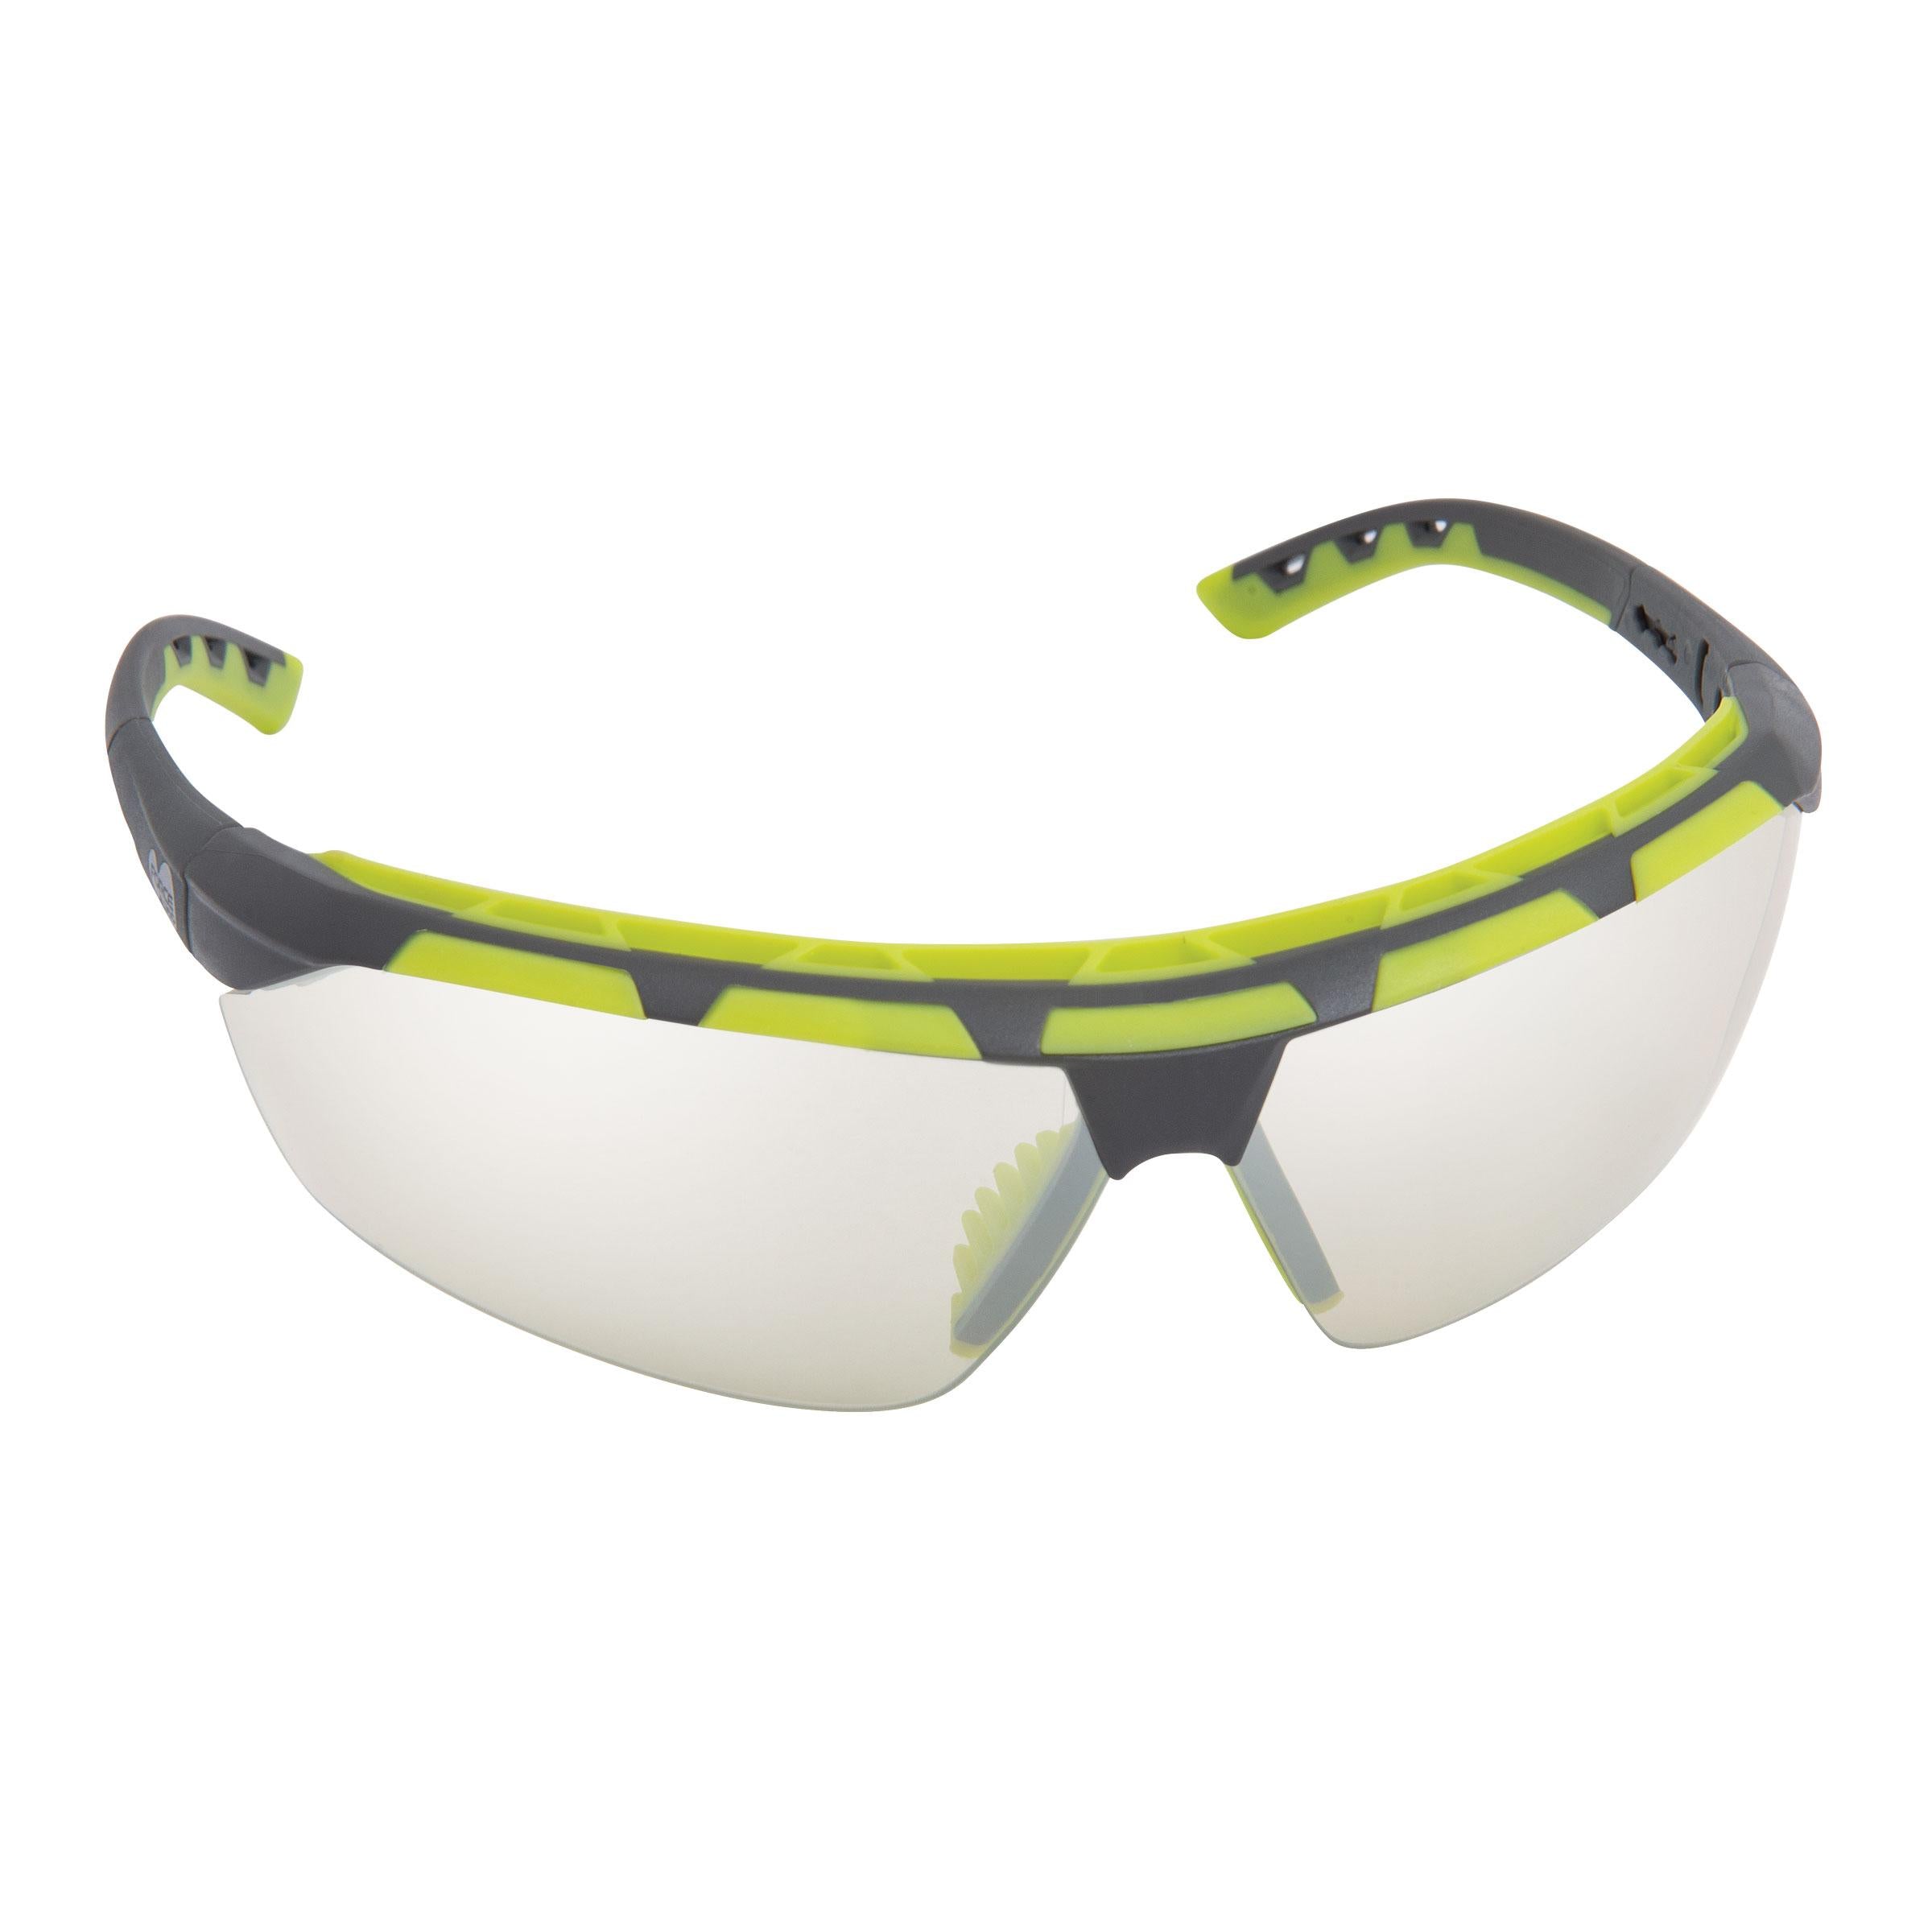 Force360 Calibr8 Clear Mirror Lens Safety Spectacle